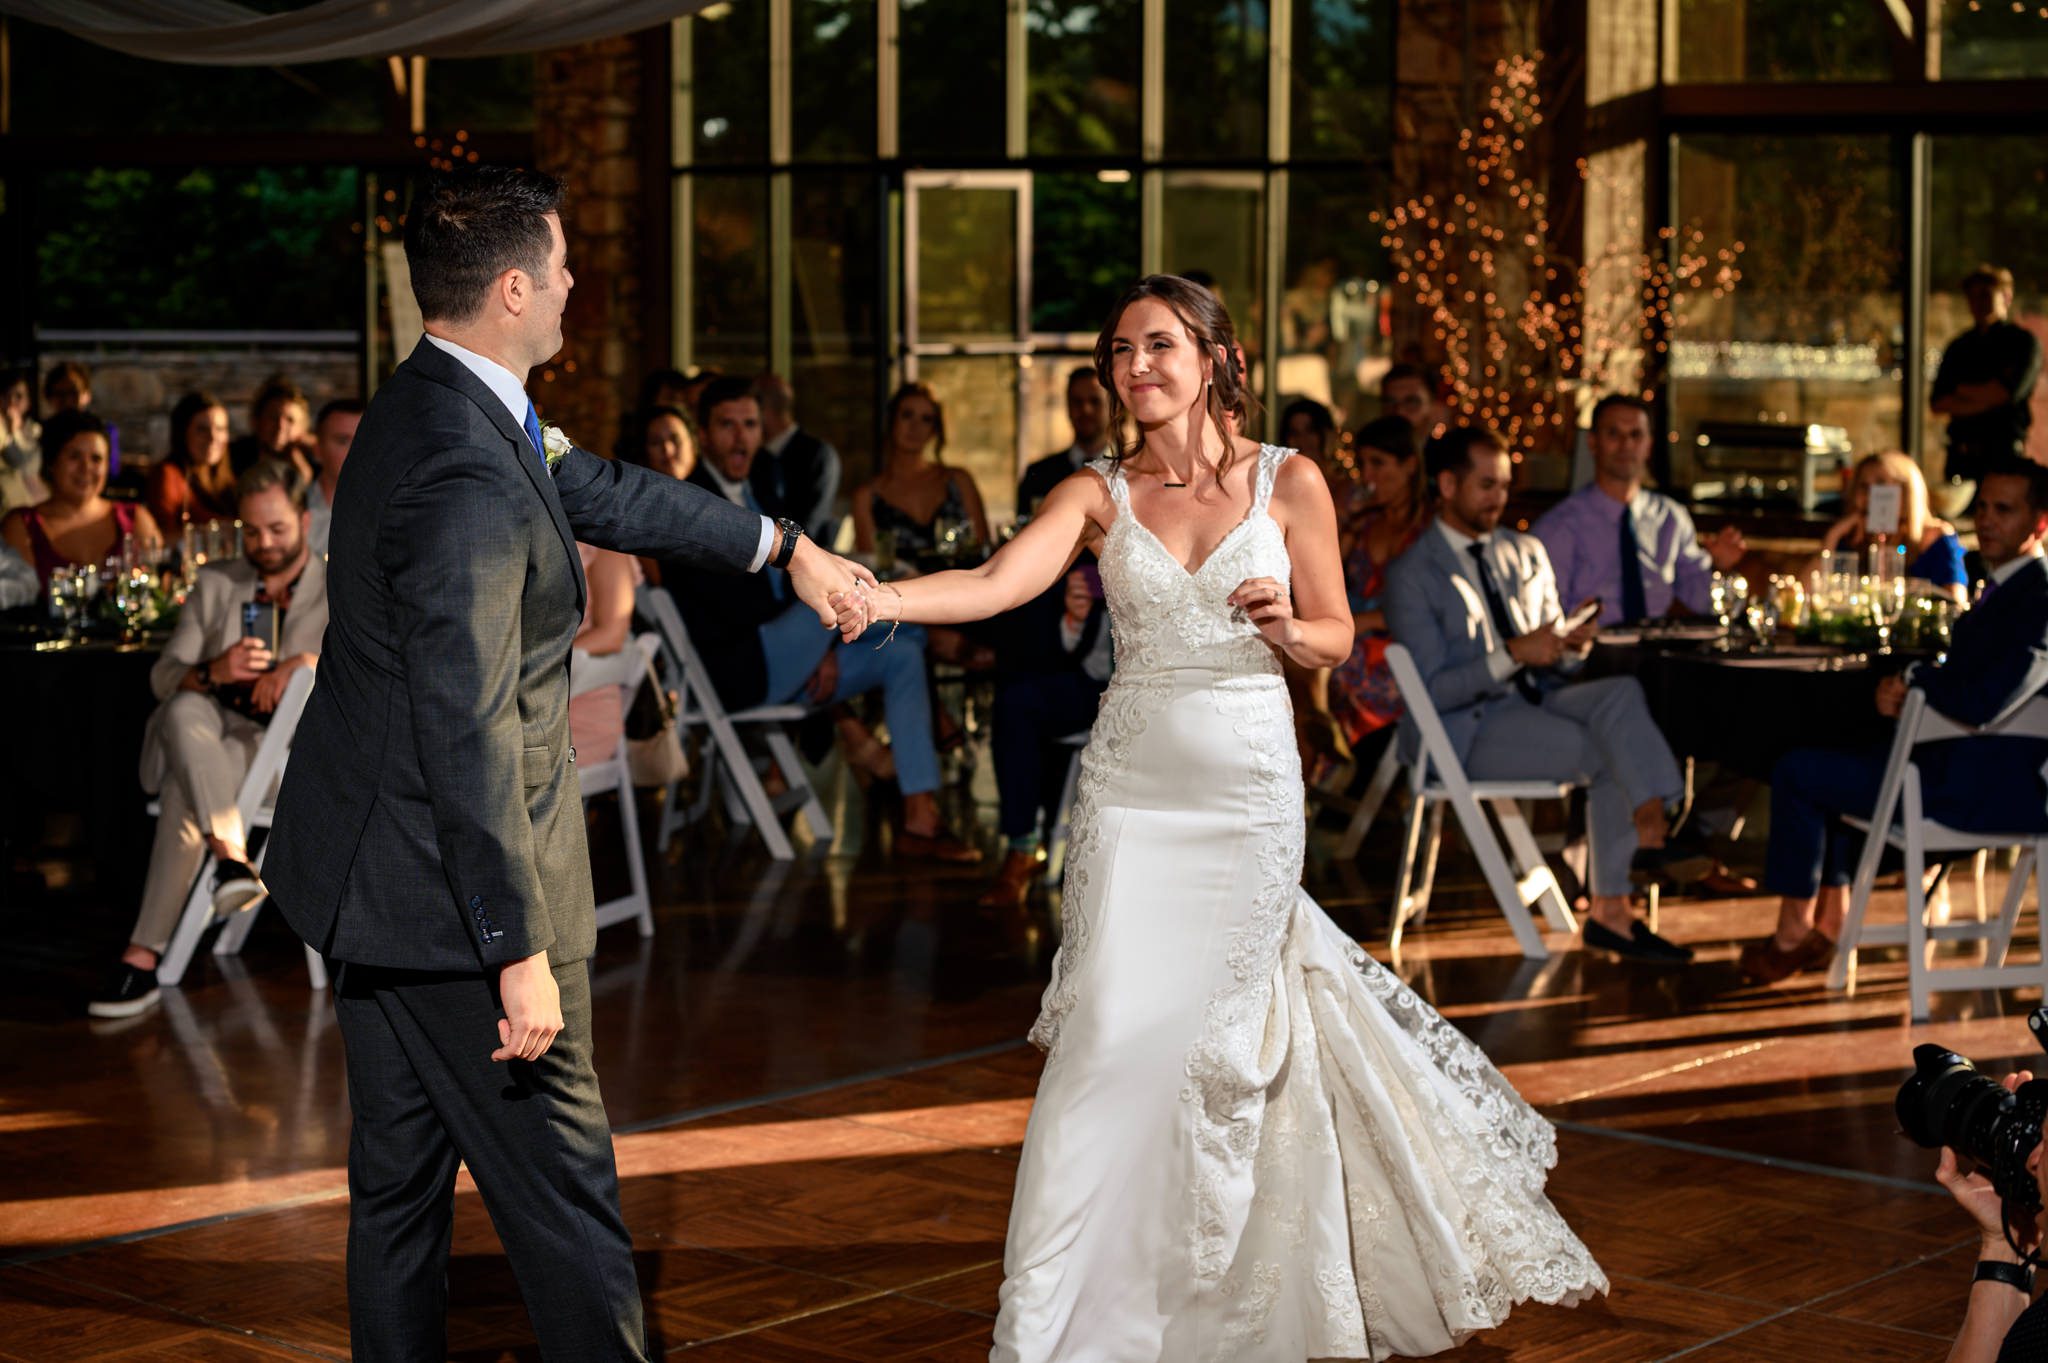 A bride and groom elegantly share their first dance at a wedding reception captured by a documentary wedding photographer at the Crest Pavilion.